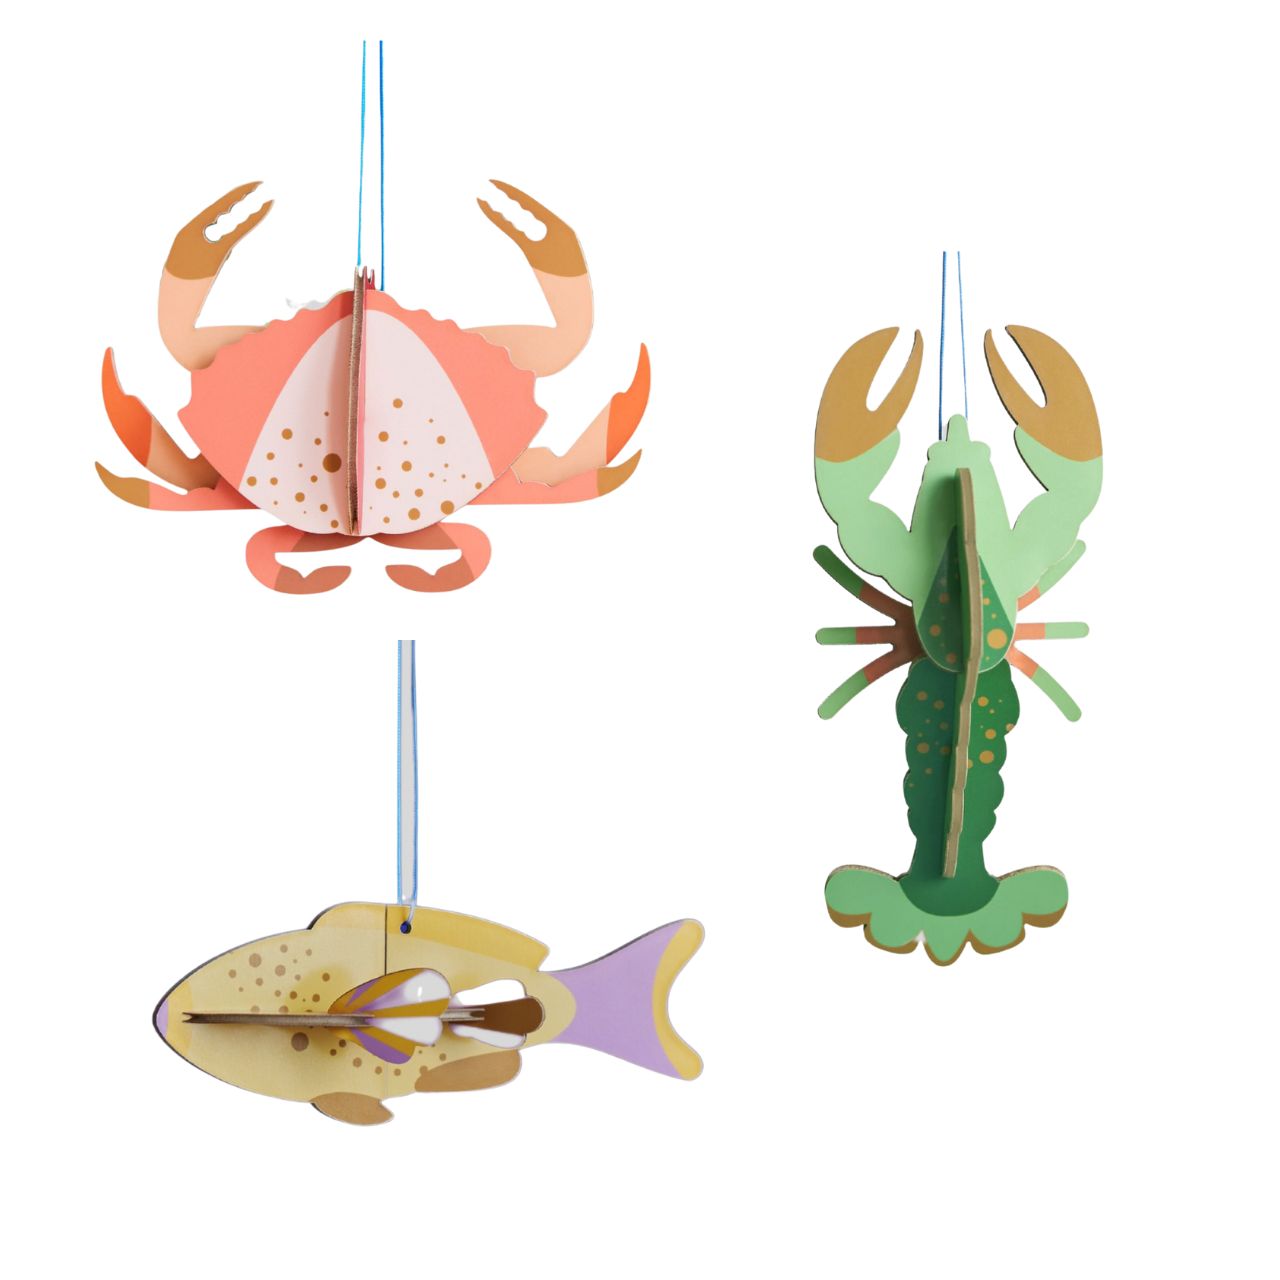 Studio Roof Set of 3 Paper Lucky Charm Decorations - Lobster, Fish, Crab